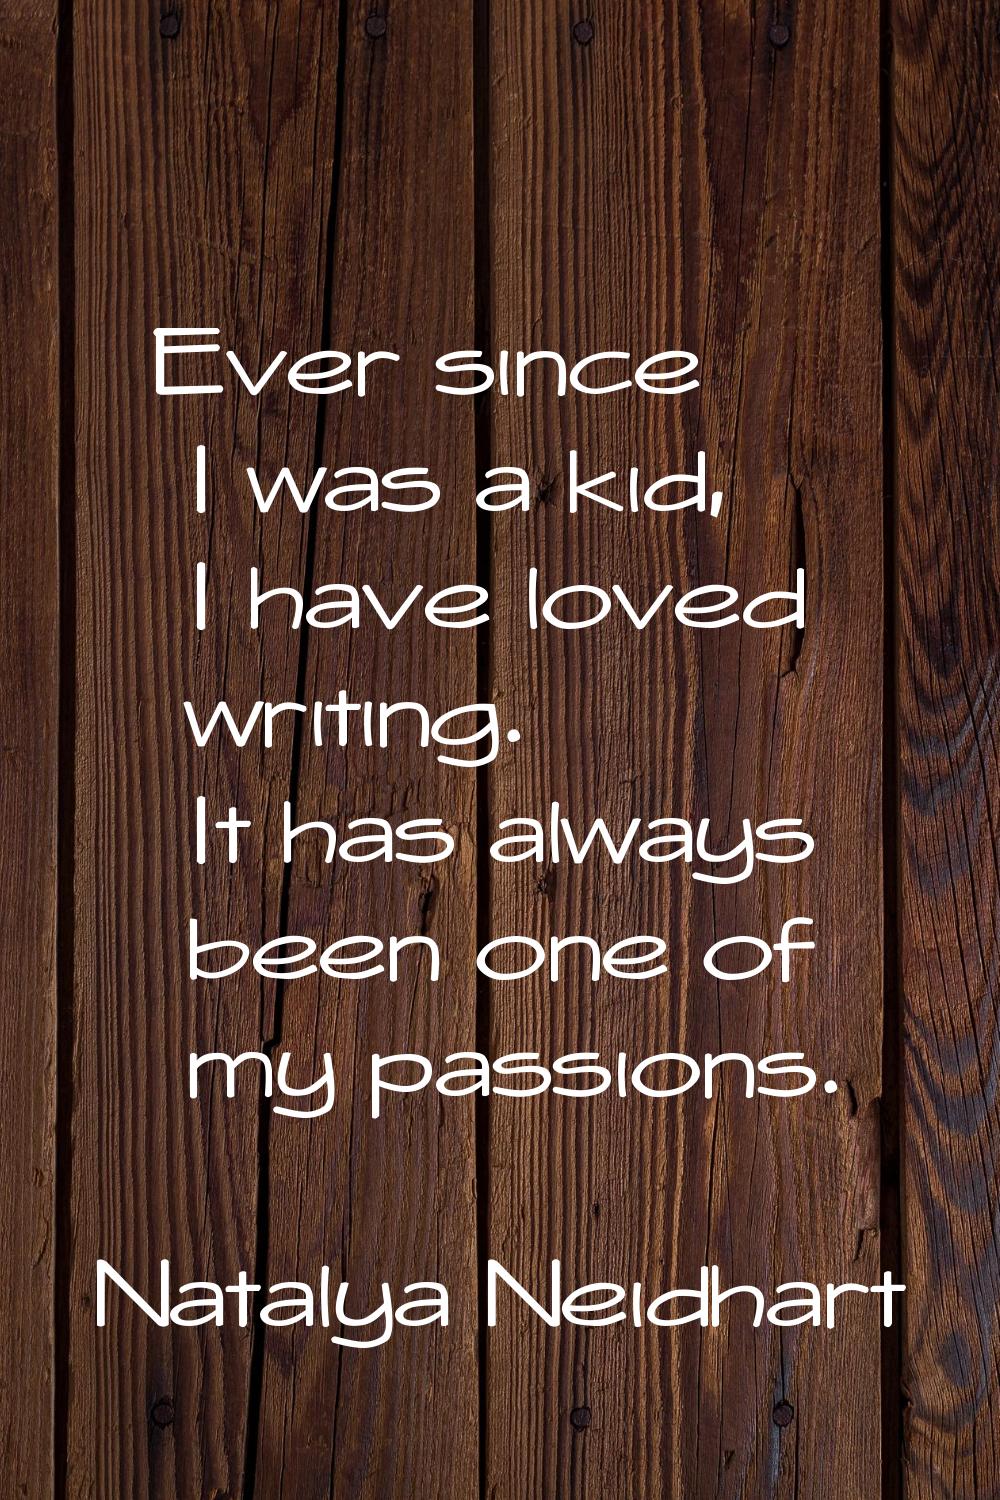 Ever since I was a kid, I have loved writing. It has always been one of my passions.